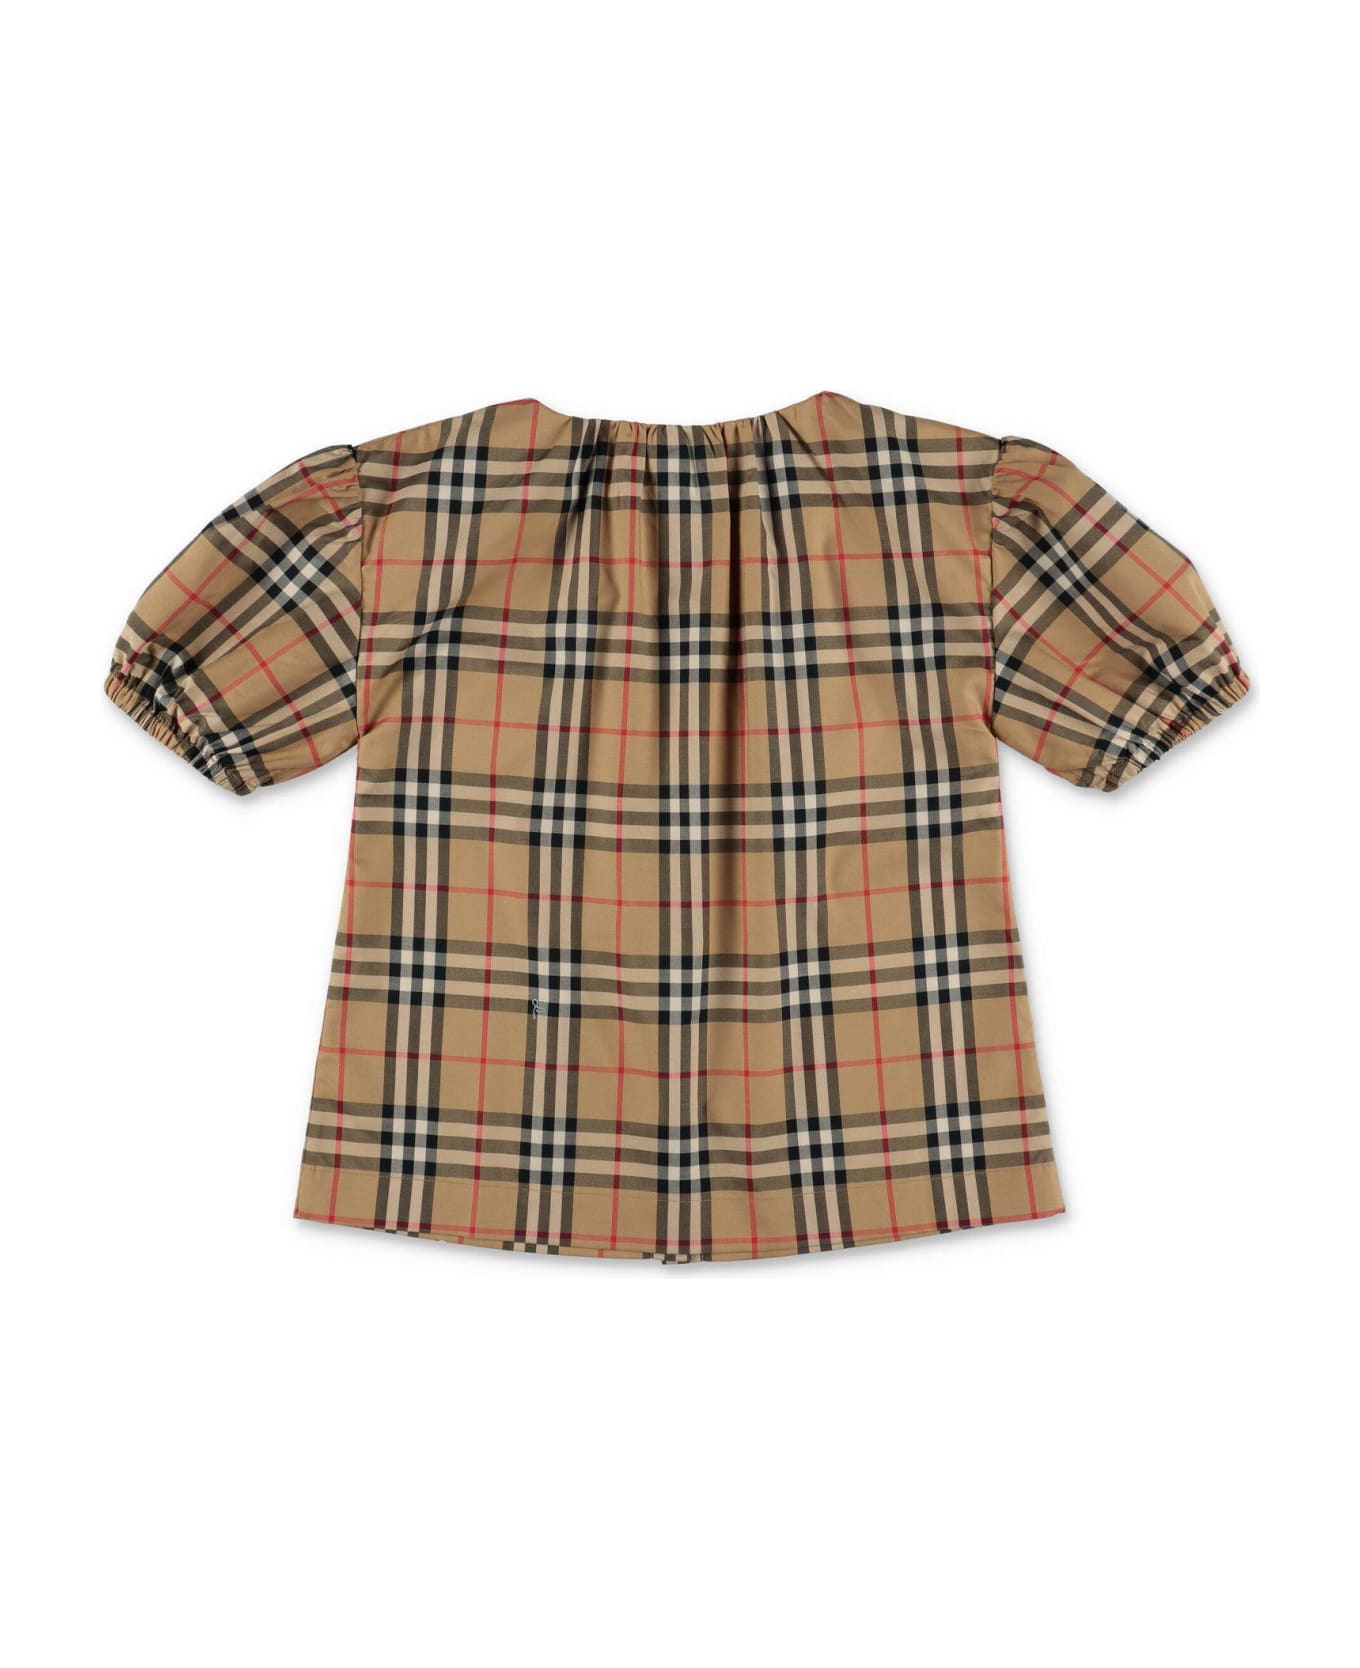 Burberry Checkered Puff Sleeved Twill Blouse - Archive beige ip chk